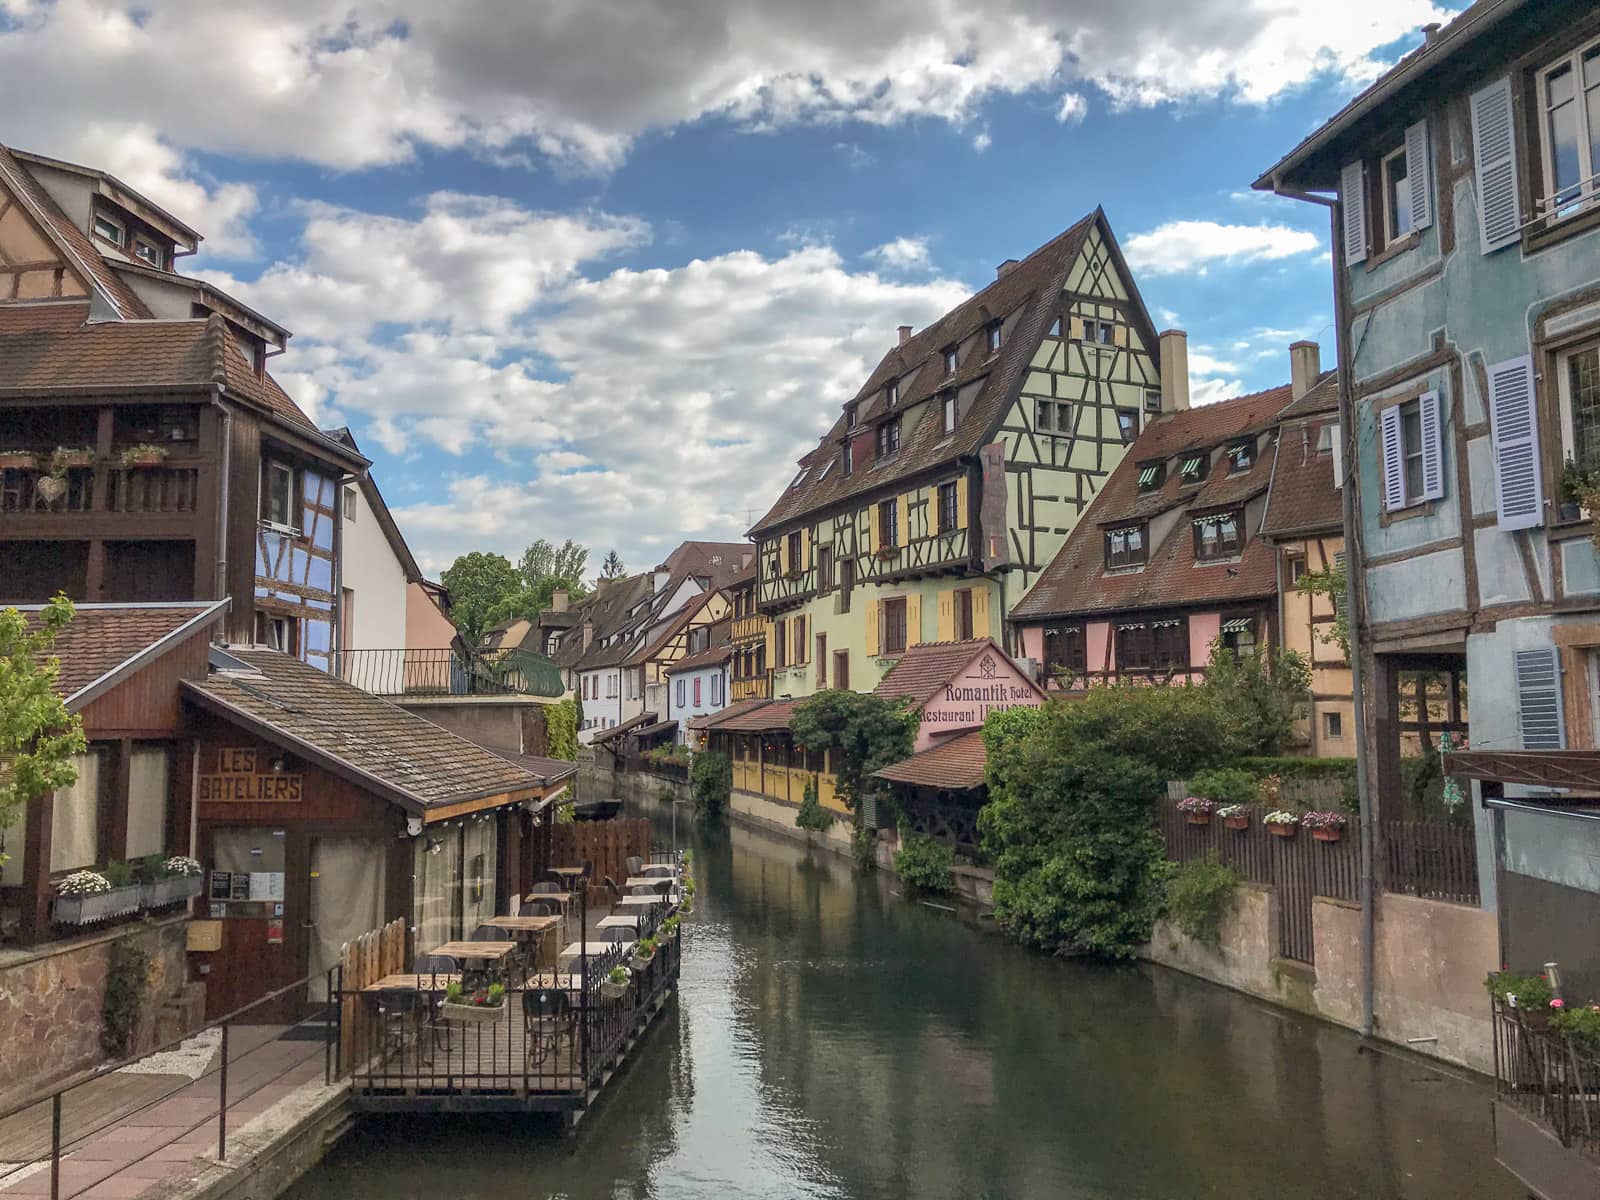 A view of a river going between two banks where old, colourful houses are erected, in the city of Colmar, France